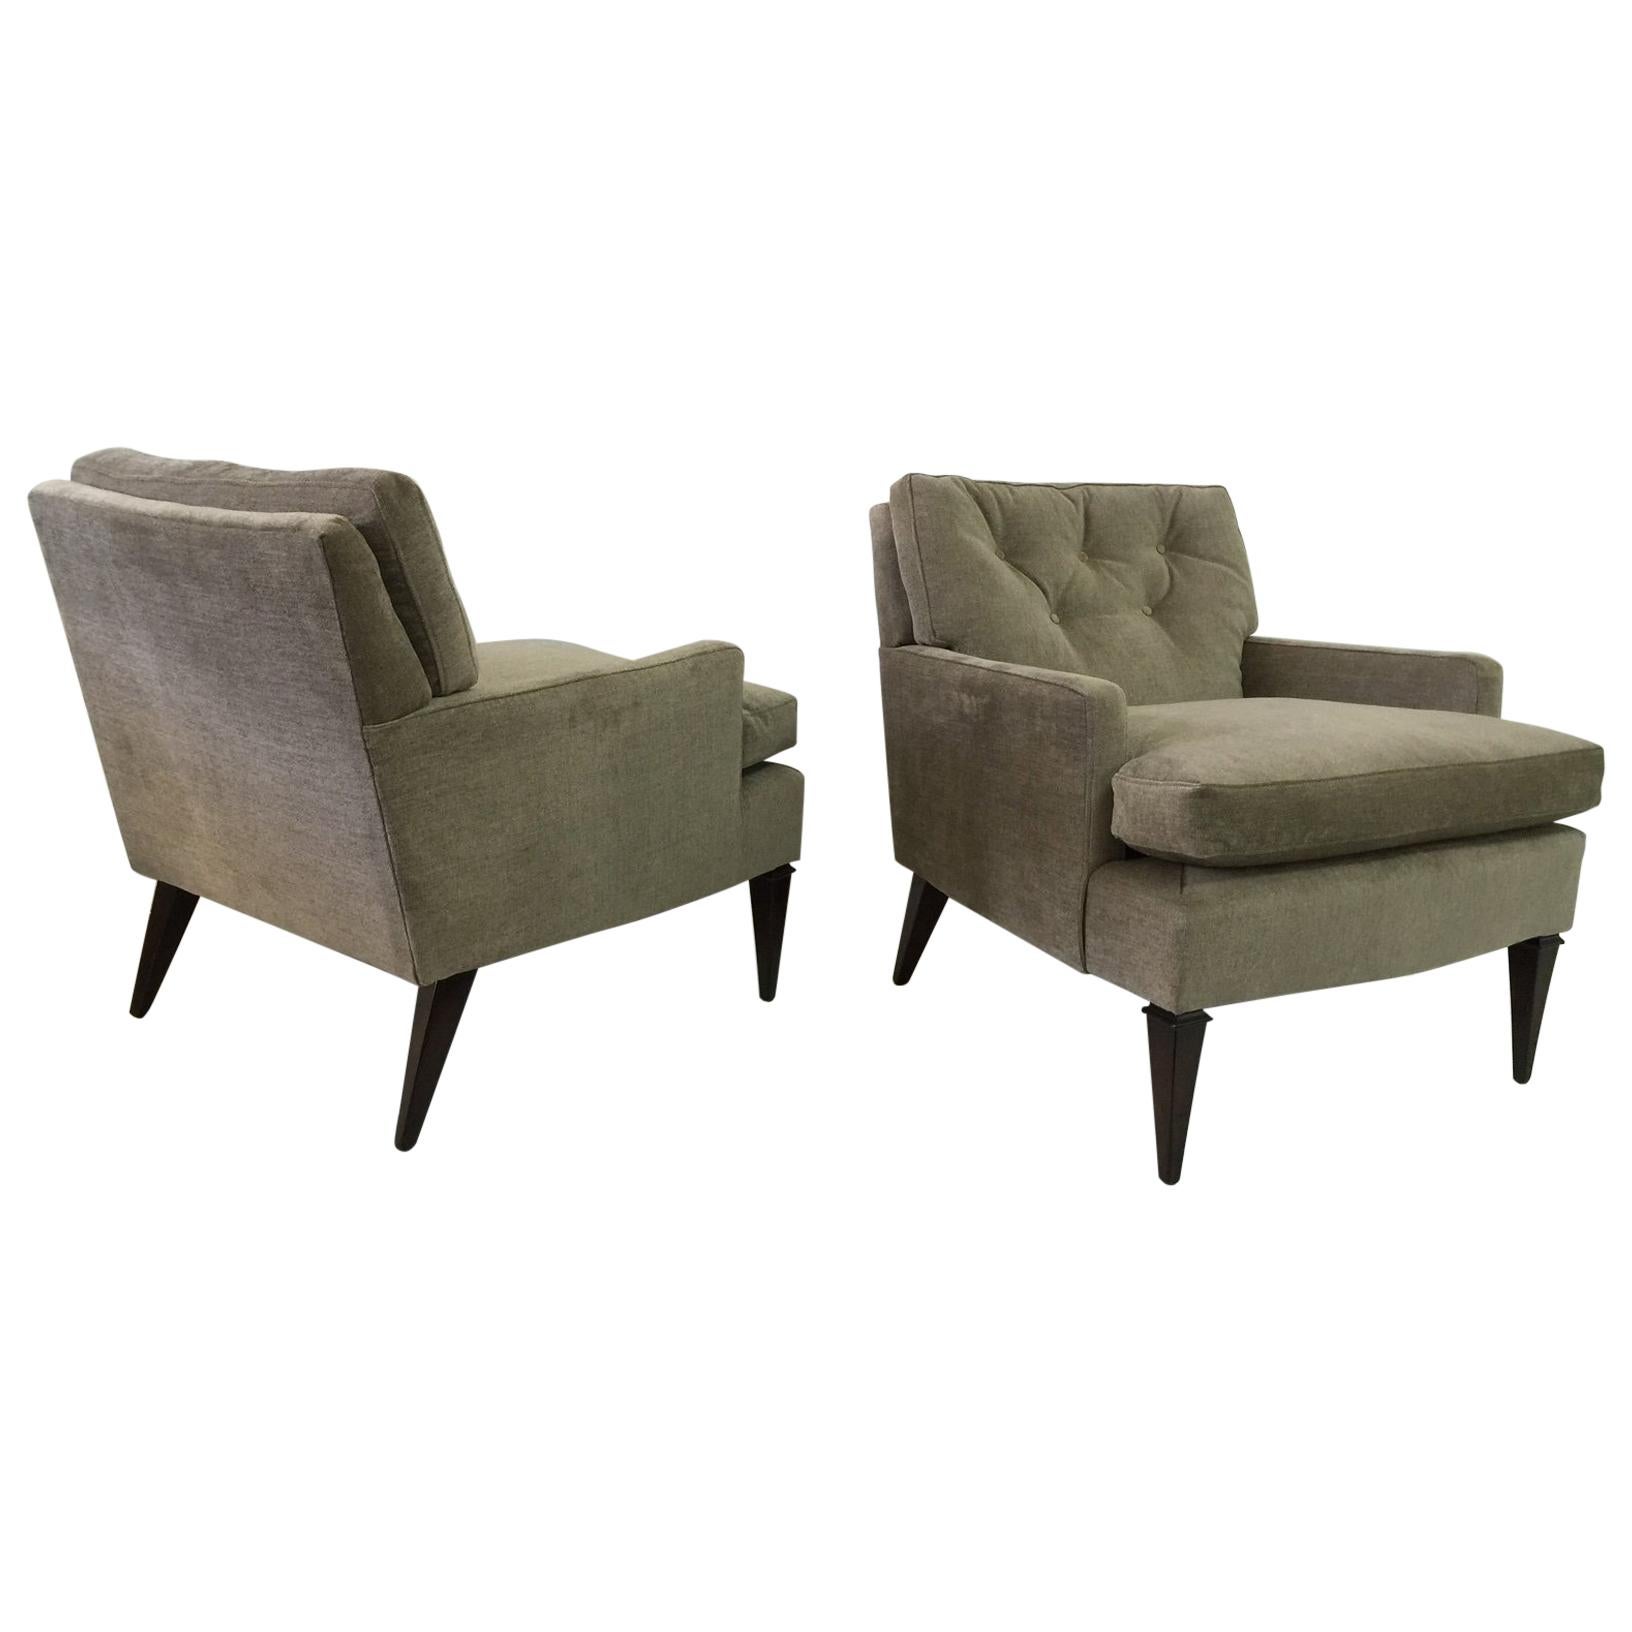 Pair of 1940s Low Armchairs _SALE_